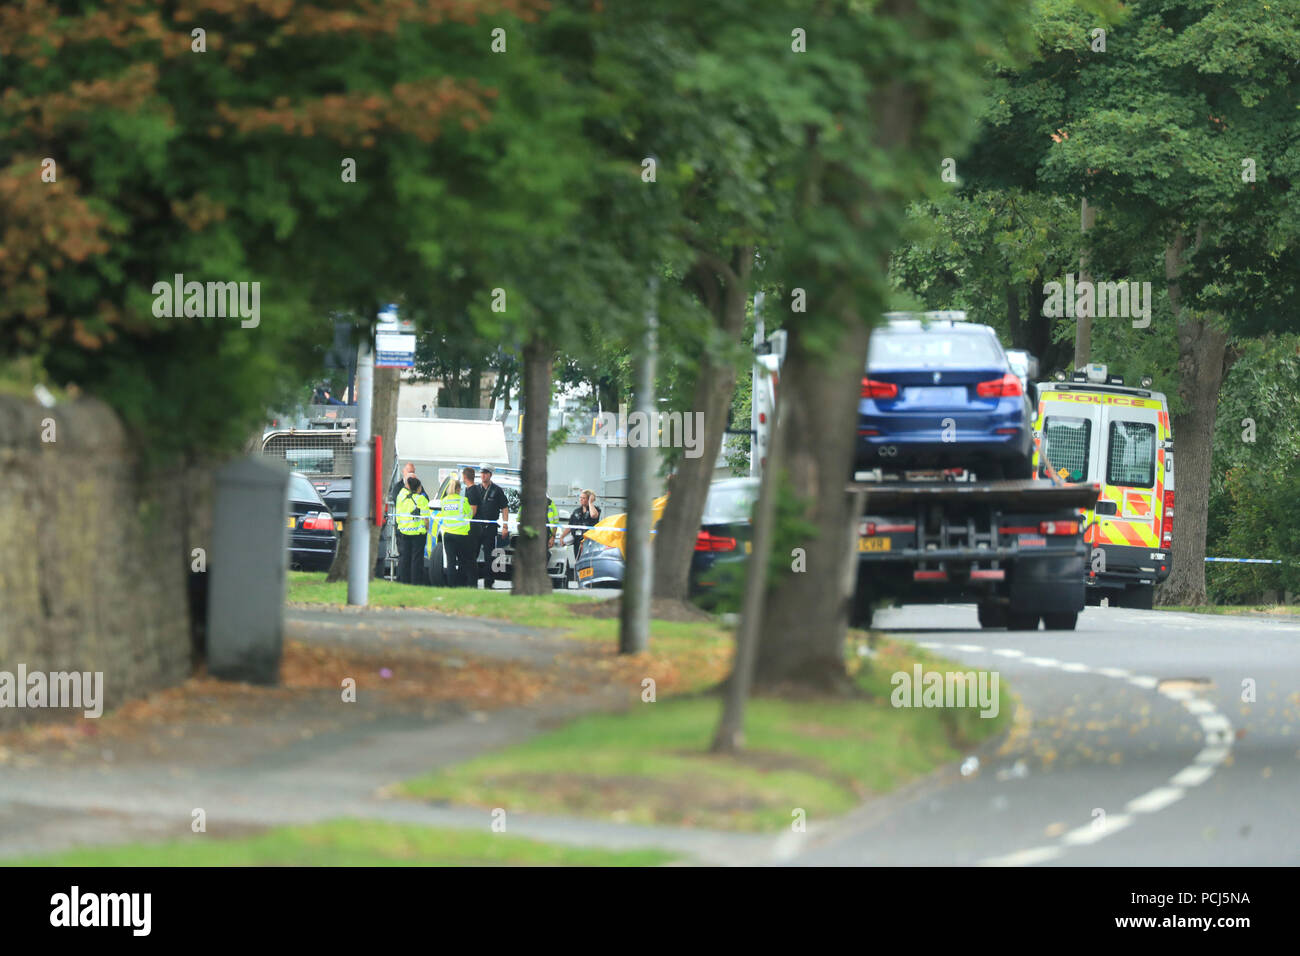 Police officers at the scene on Bingley Road at the junction with Toller Lane in Bradford following a road traffic collision where four males died in a car which was being followed by an unmarked police vehicle when it crashed. Stock Photo